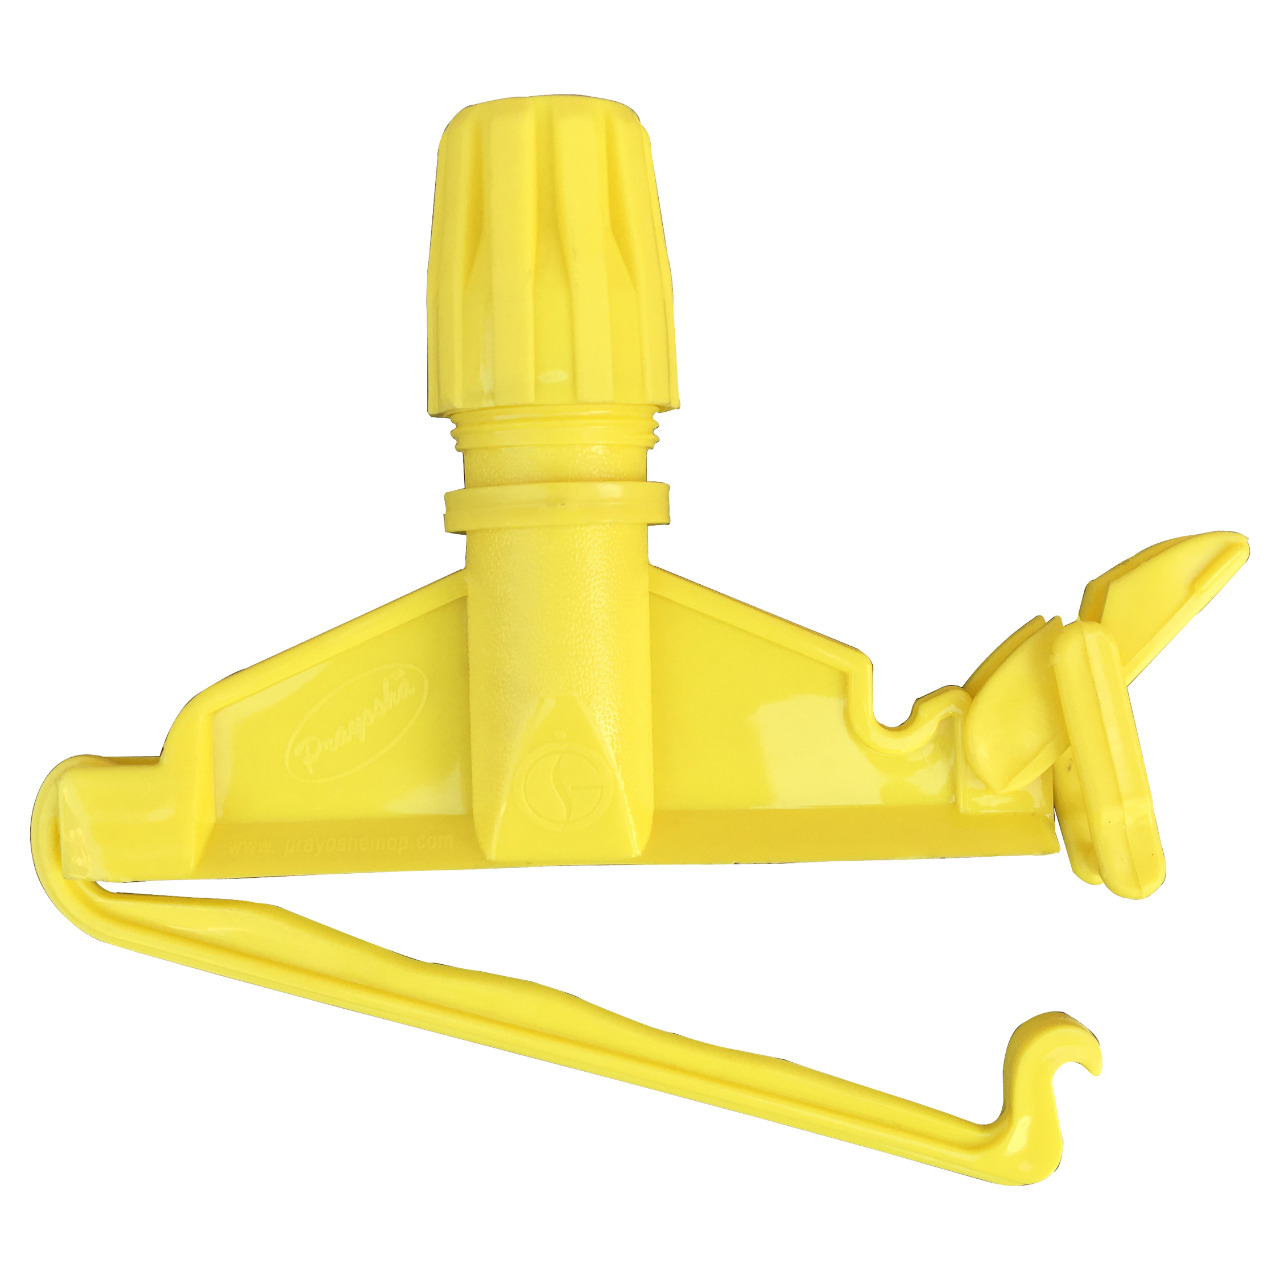 HD Plastic Clamp for Wet Mop